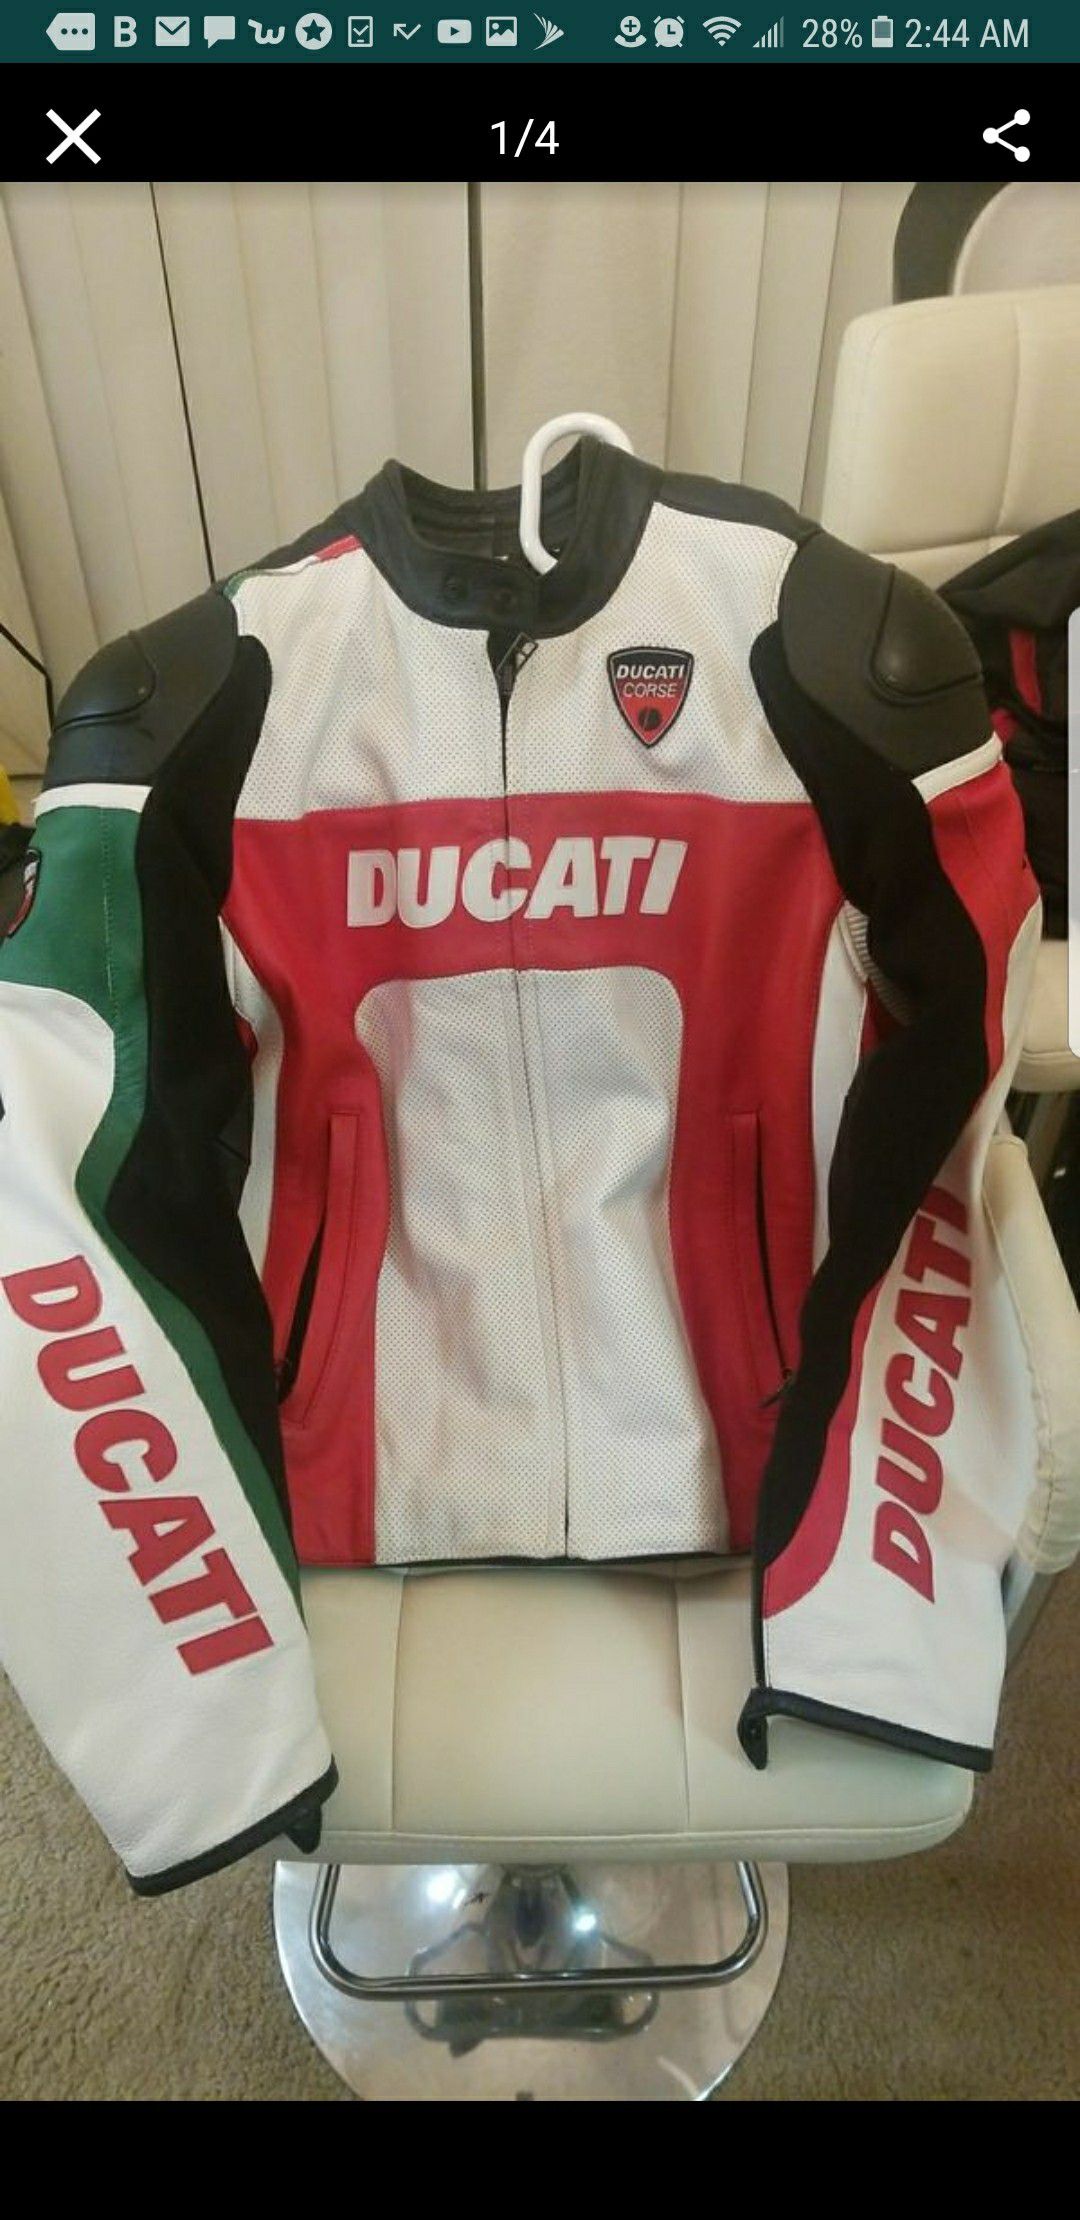 Dainese Ducati jacket new condition.